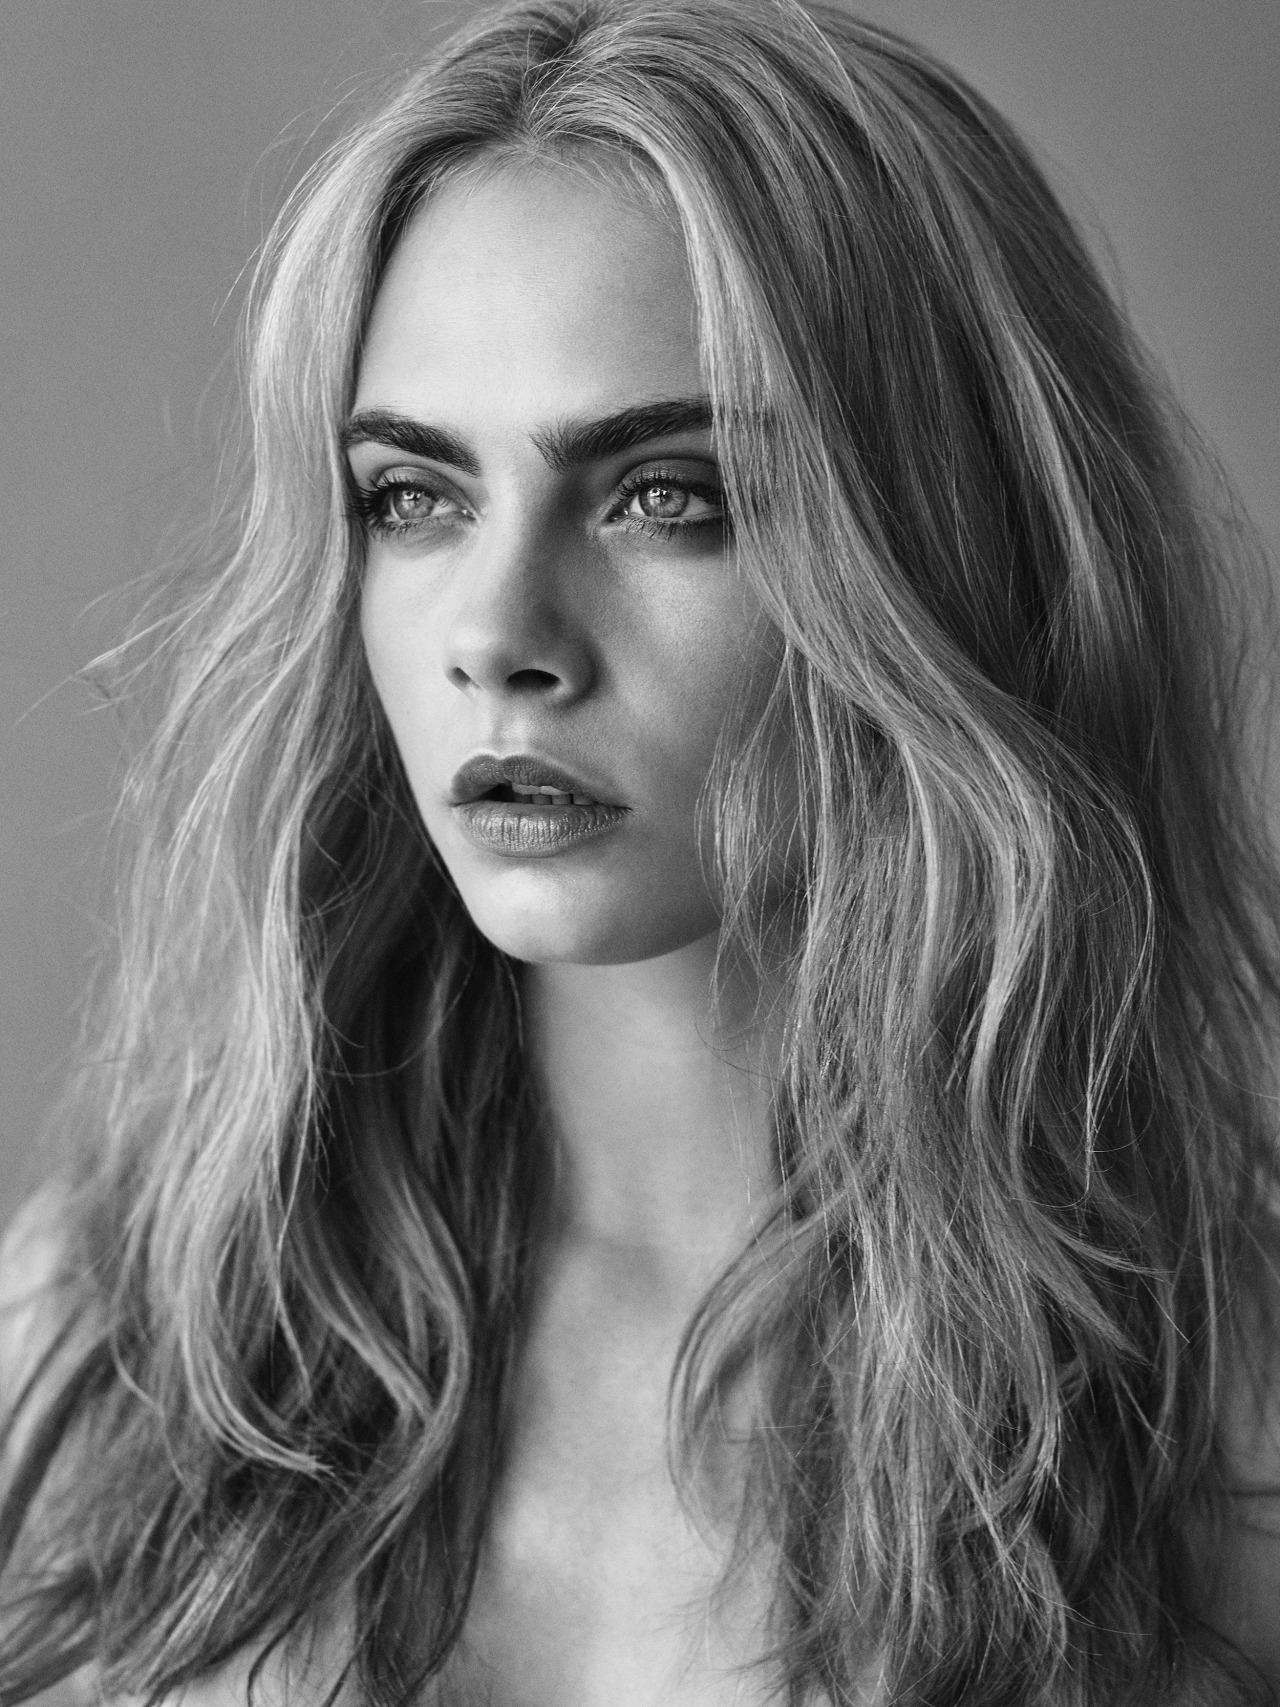 Cara Delevingne by Simon Emmett for #Esquire UK by Yeah Sunglasses!